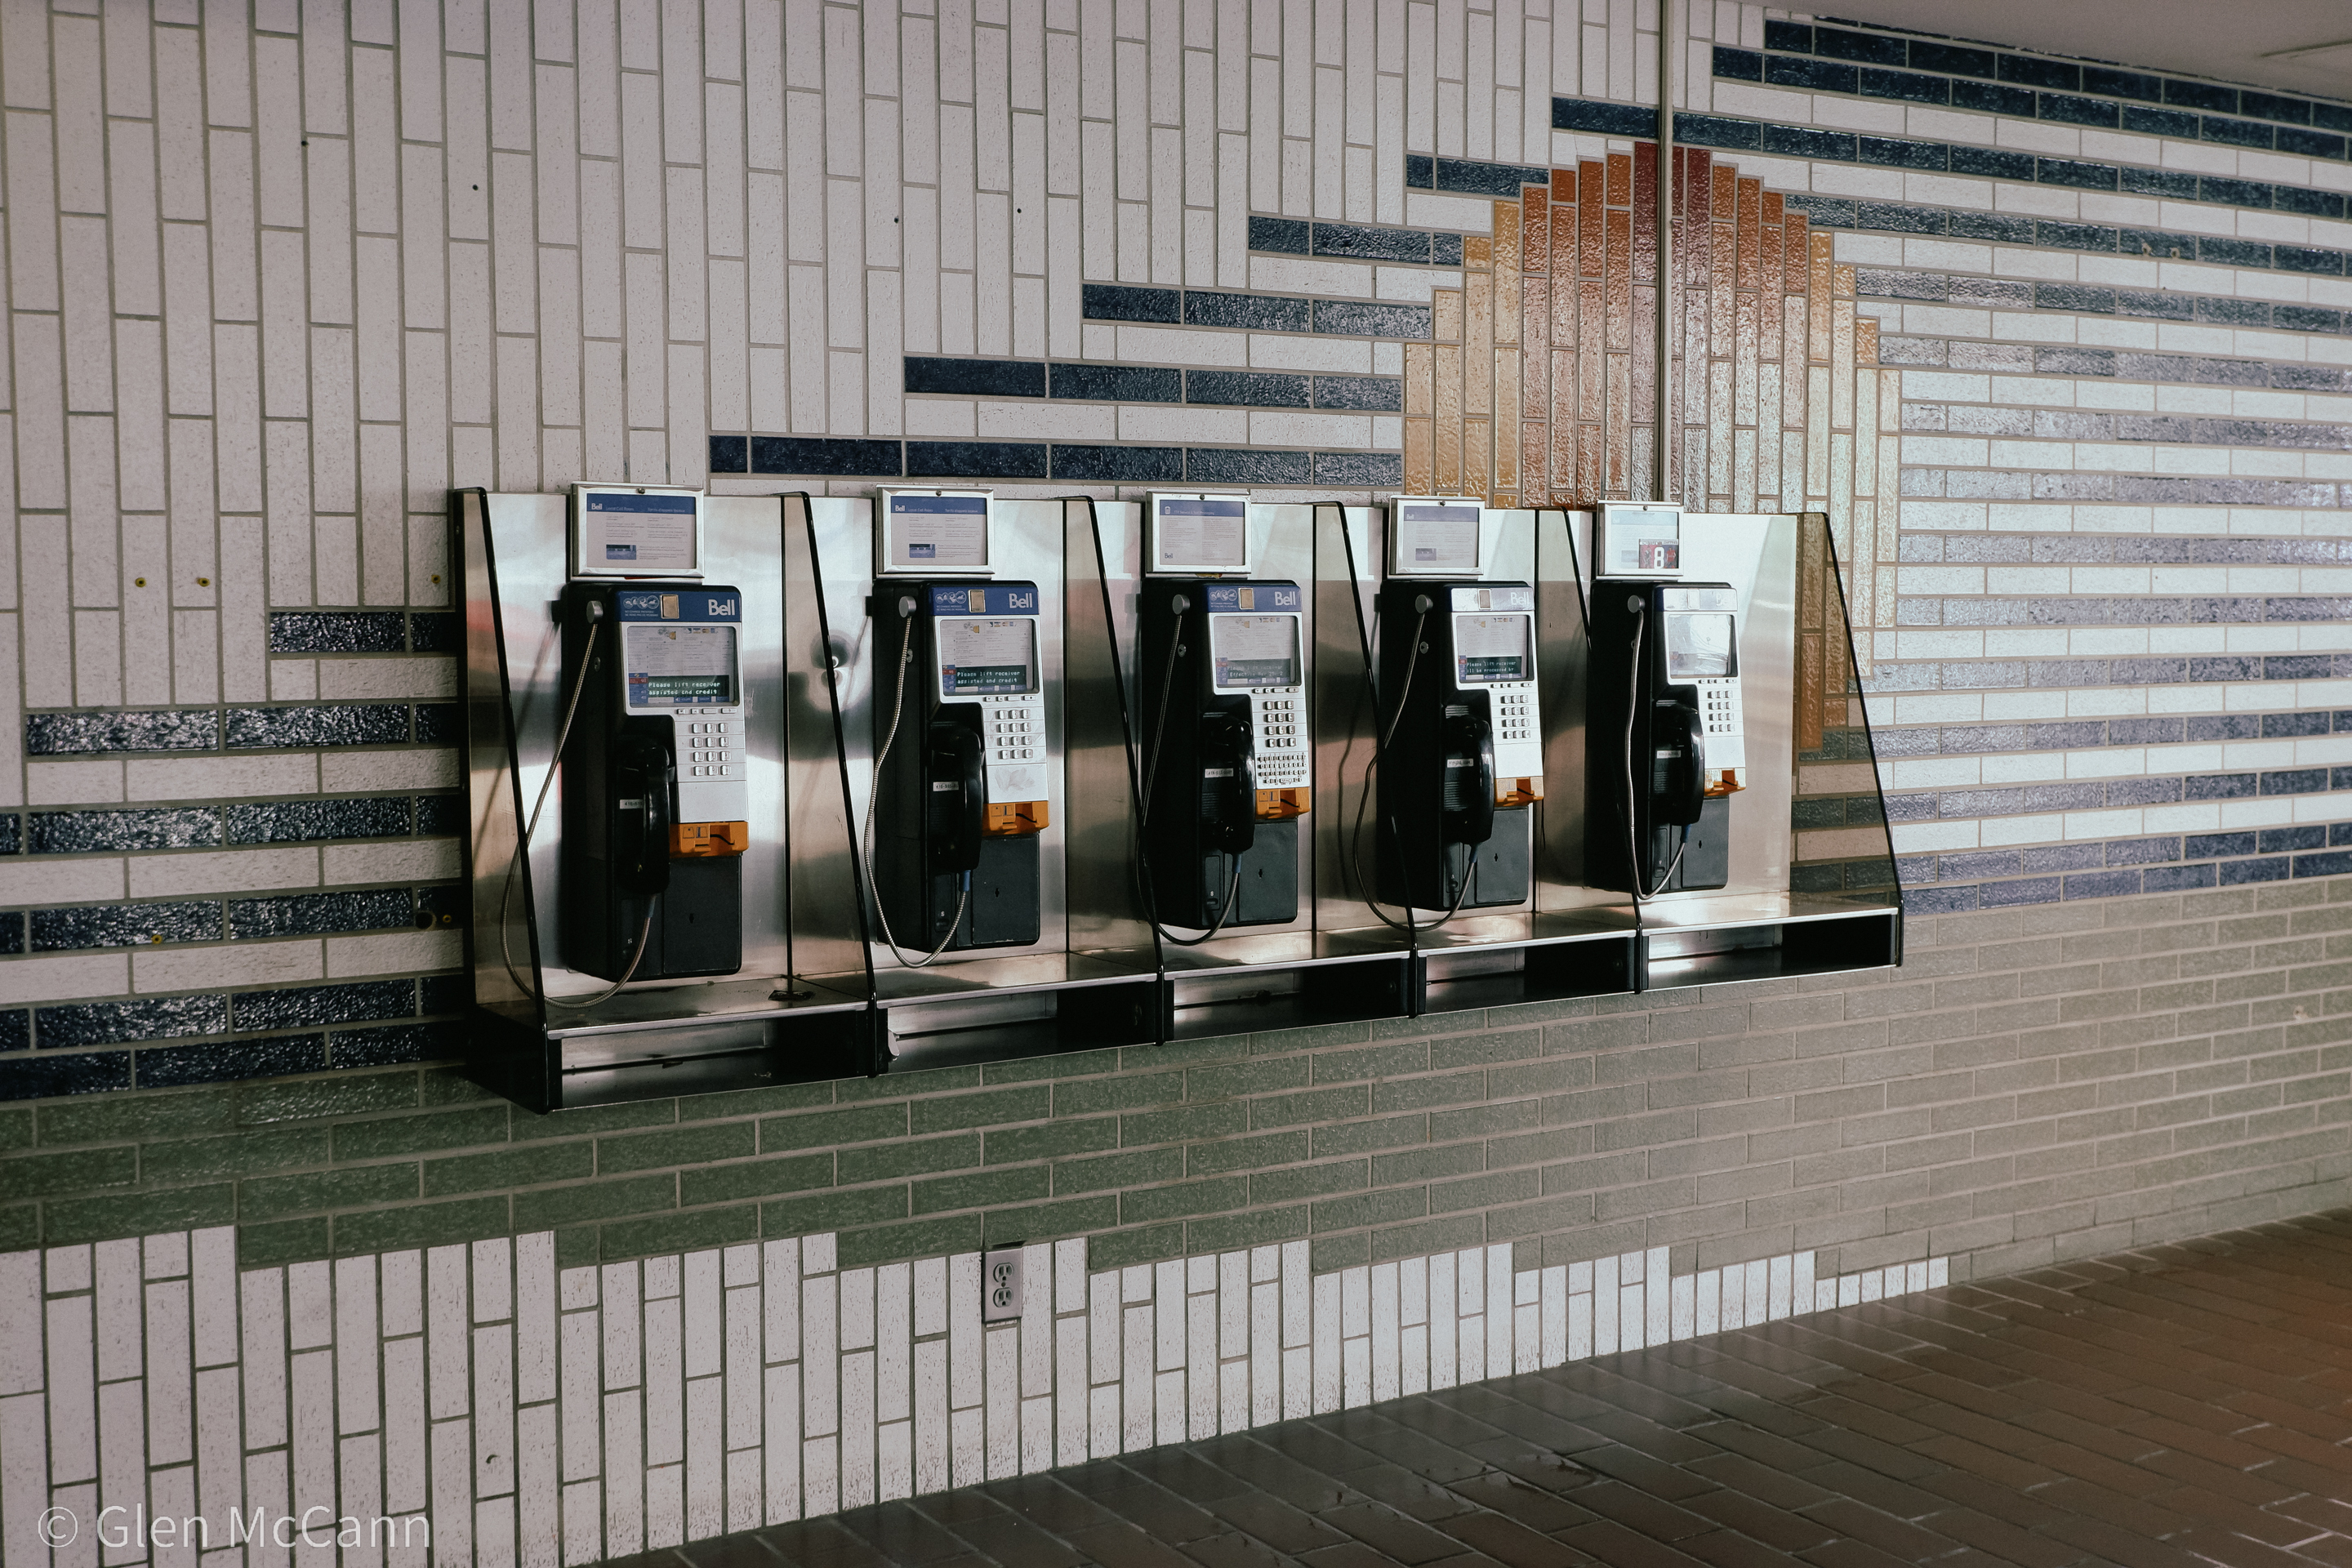 Photo of a line of pay phones against a colourful brick wall (indoors).